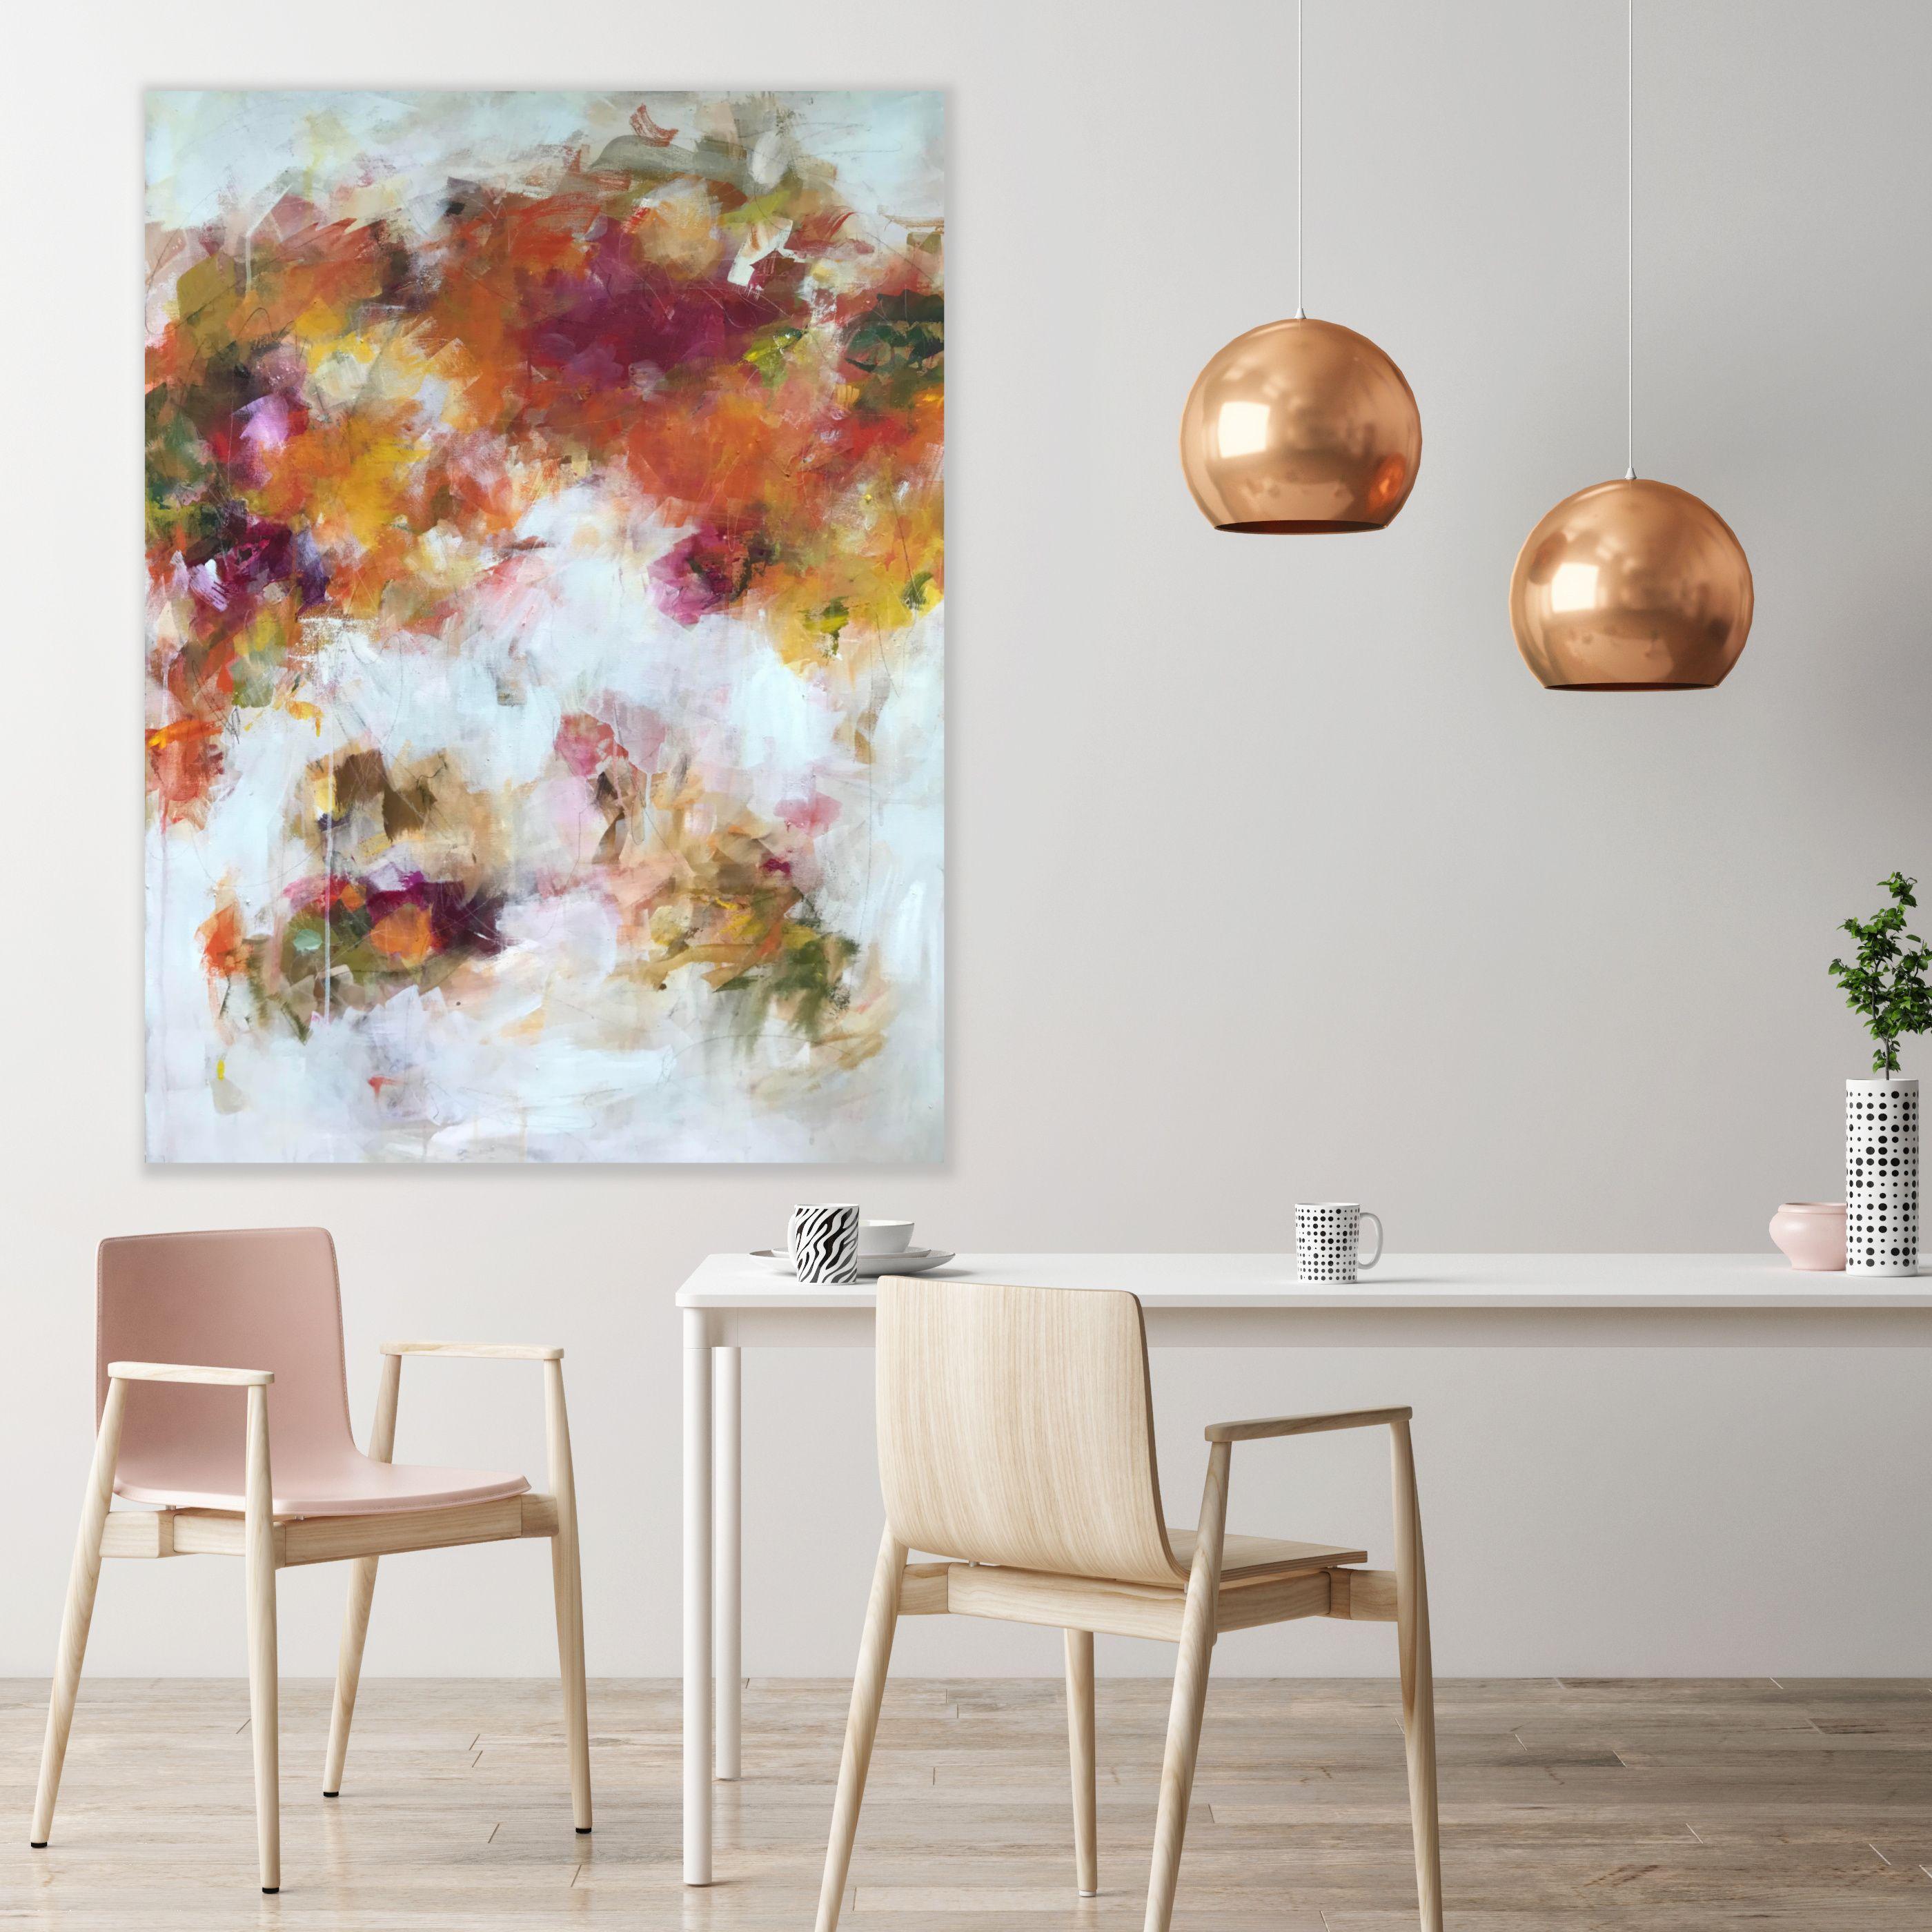 This beautifully vibrant and uplifting painting has been built over many thin layers of paint and grew out of a slow process. Its palette attempts to capture the notion of freshness and vibrancy that abounds in early summer with flowers opening to